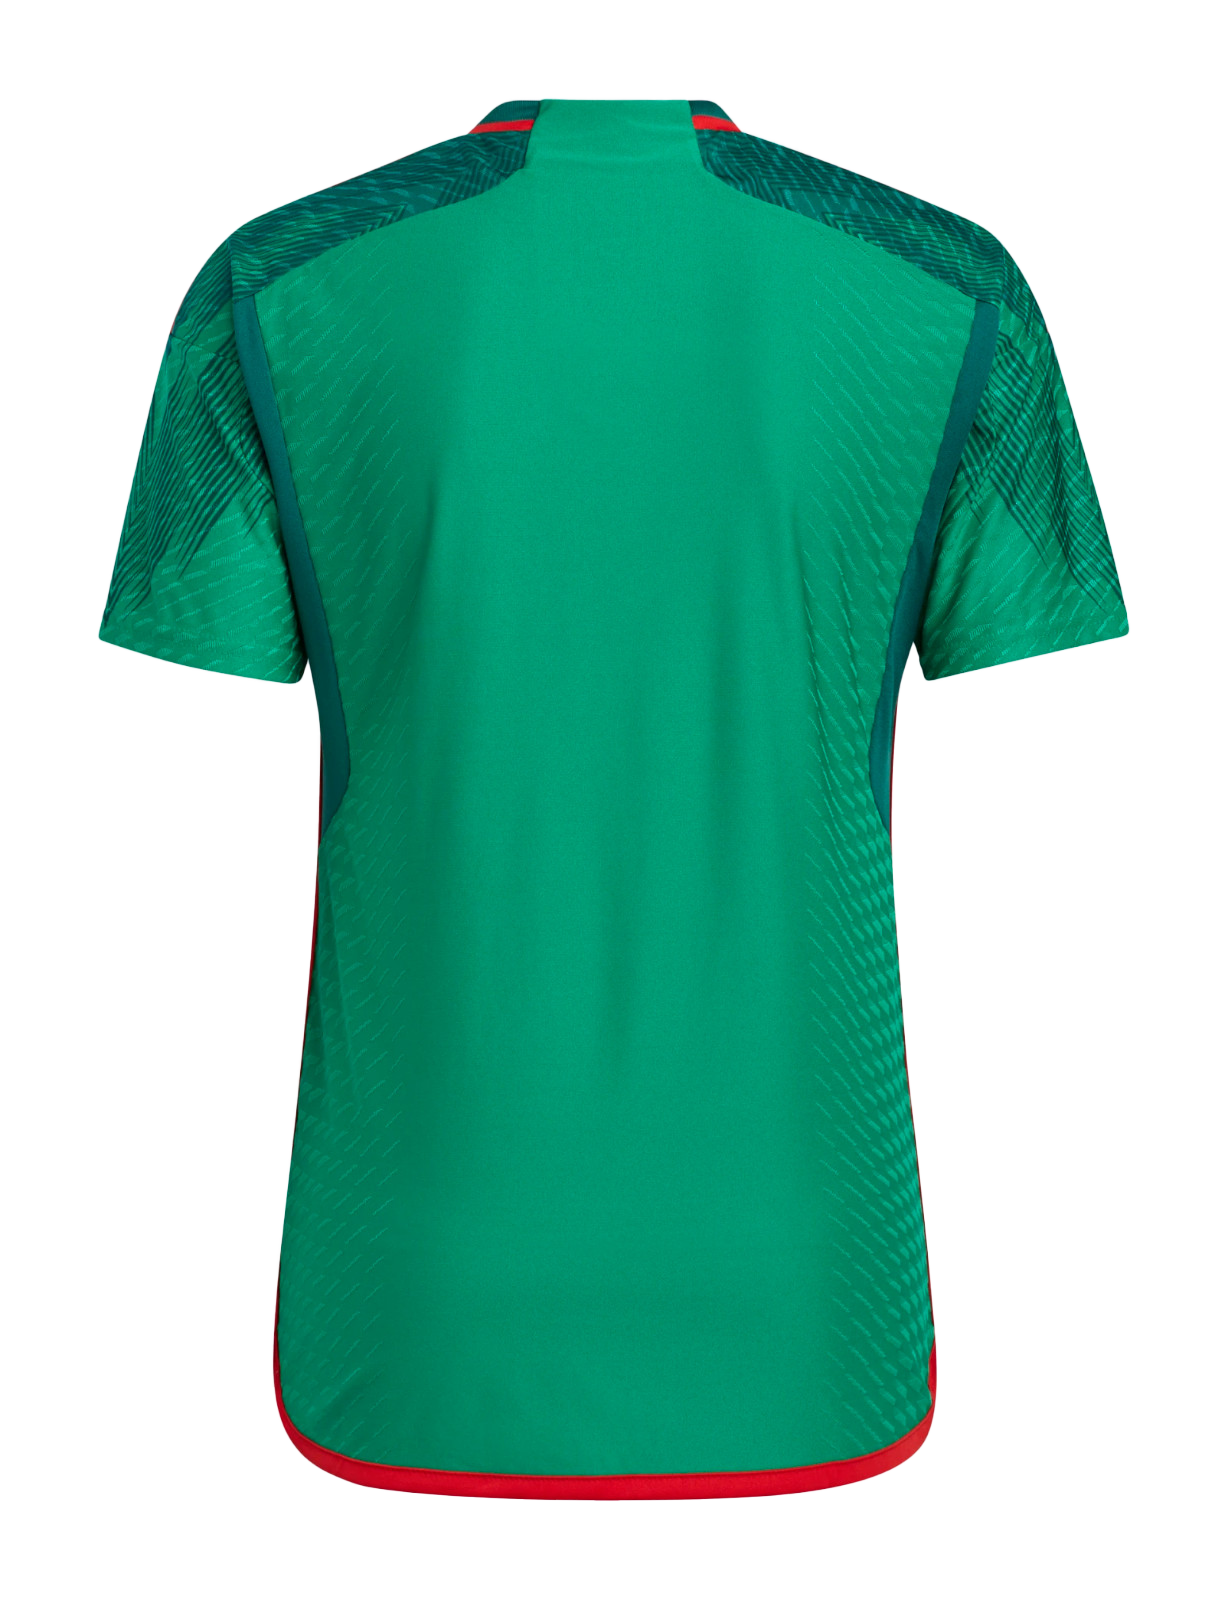 JERSEY MEXICO HOME WORLD CUP 2022